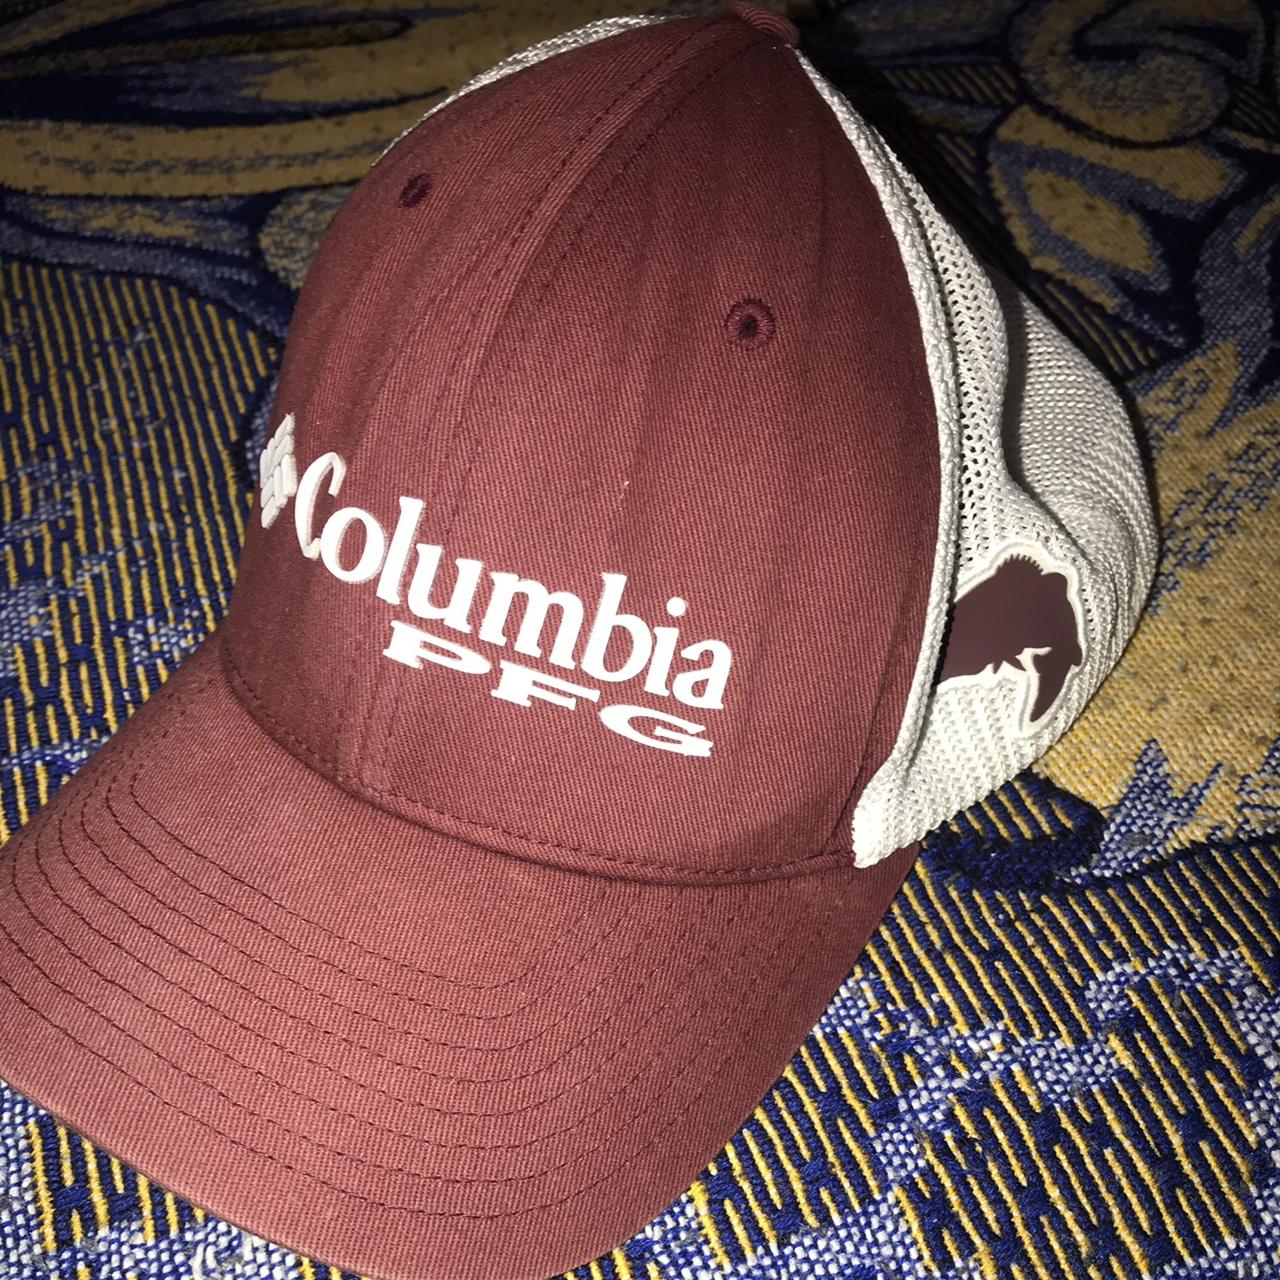 Columbia PFG Hat Fitted With Fish On The Side Color - Depop